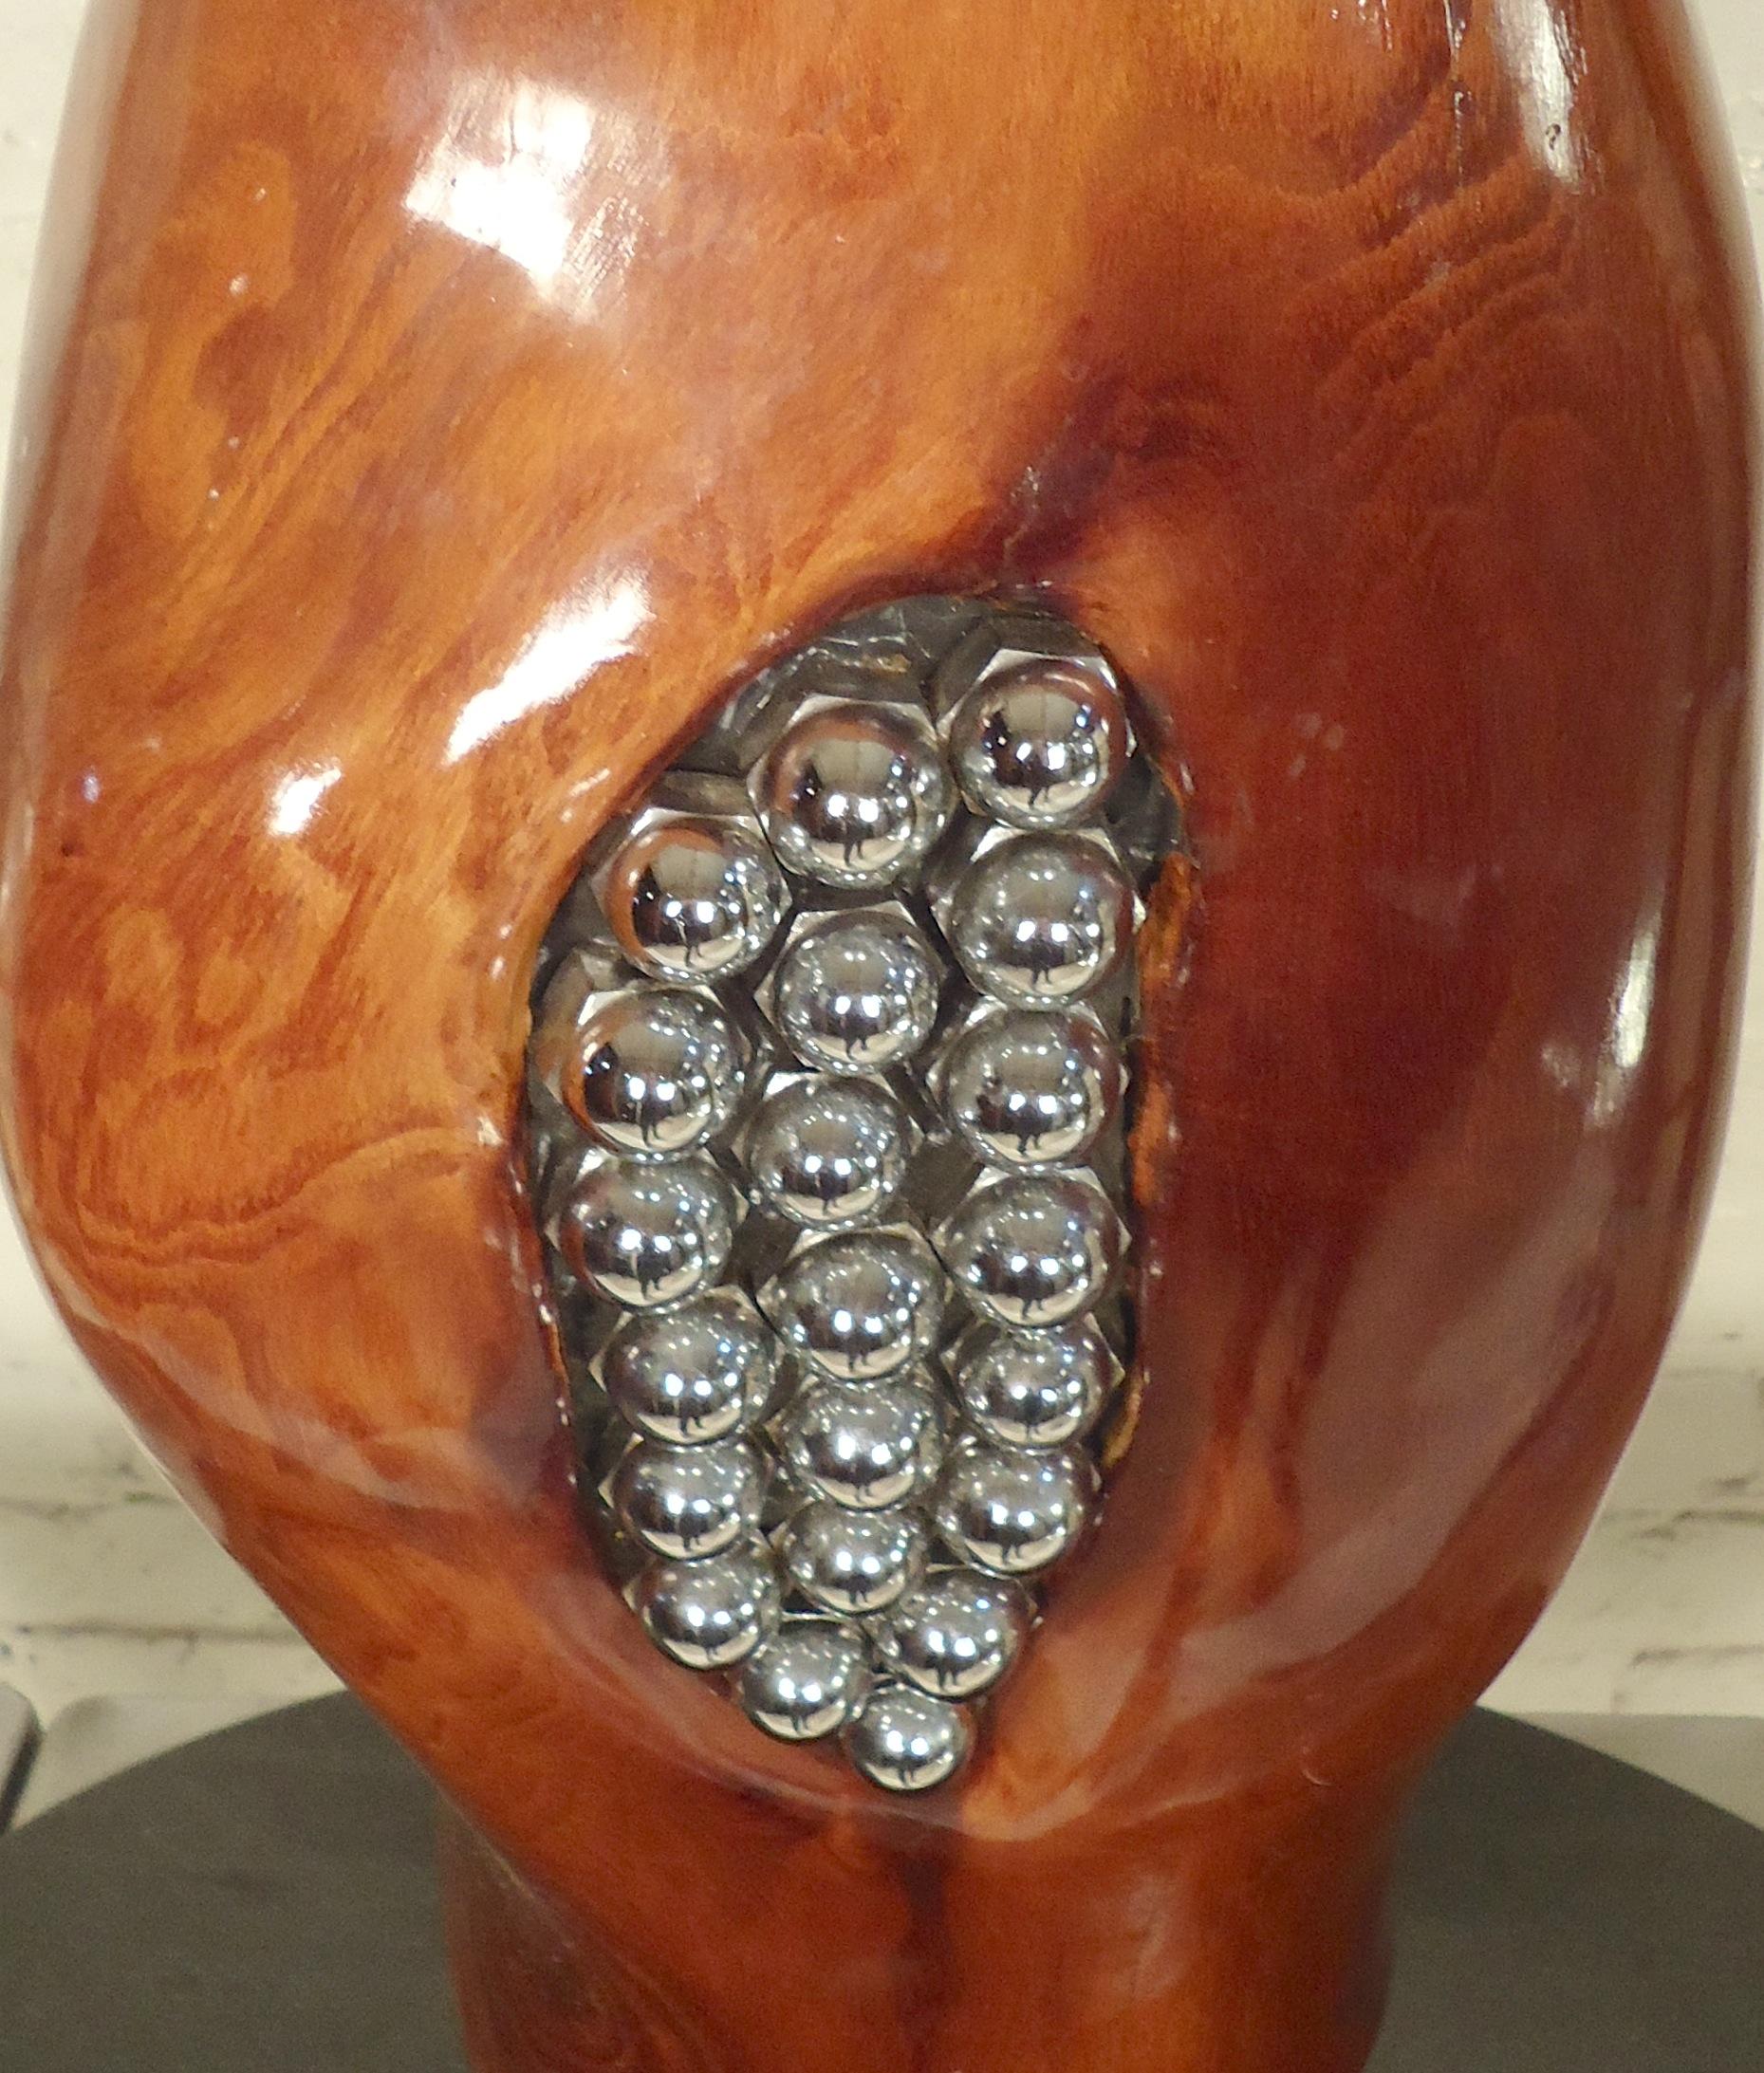 Unusual handmade sculpture art featuring a polished tree slab with inlaid lug nuts, set on a marble base.

(Please confirm item location - NY or NJ - with dealer).
 